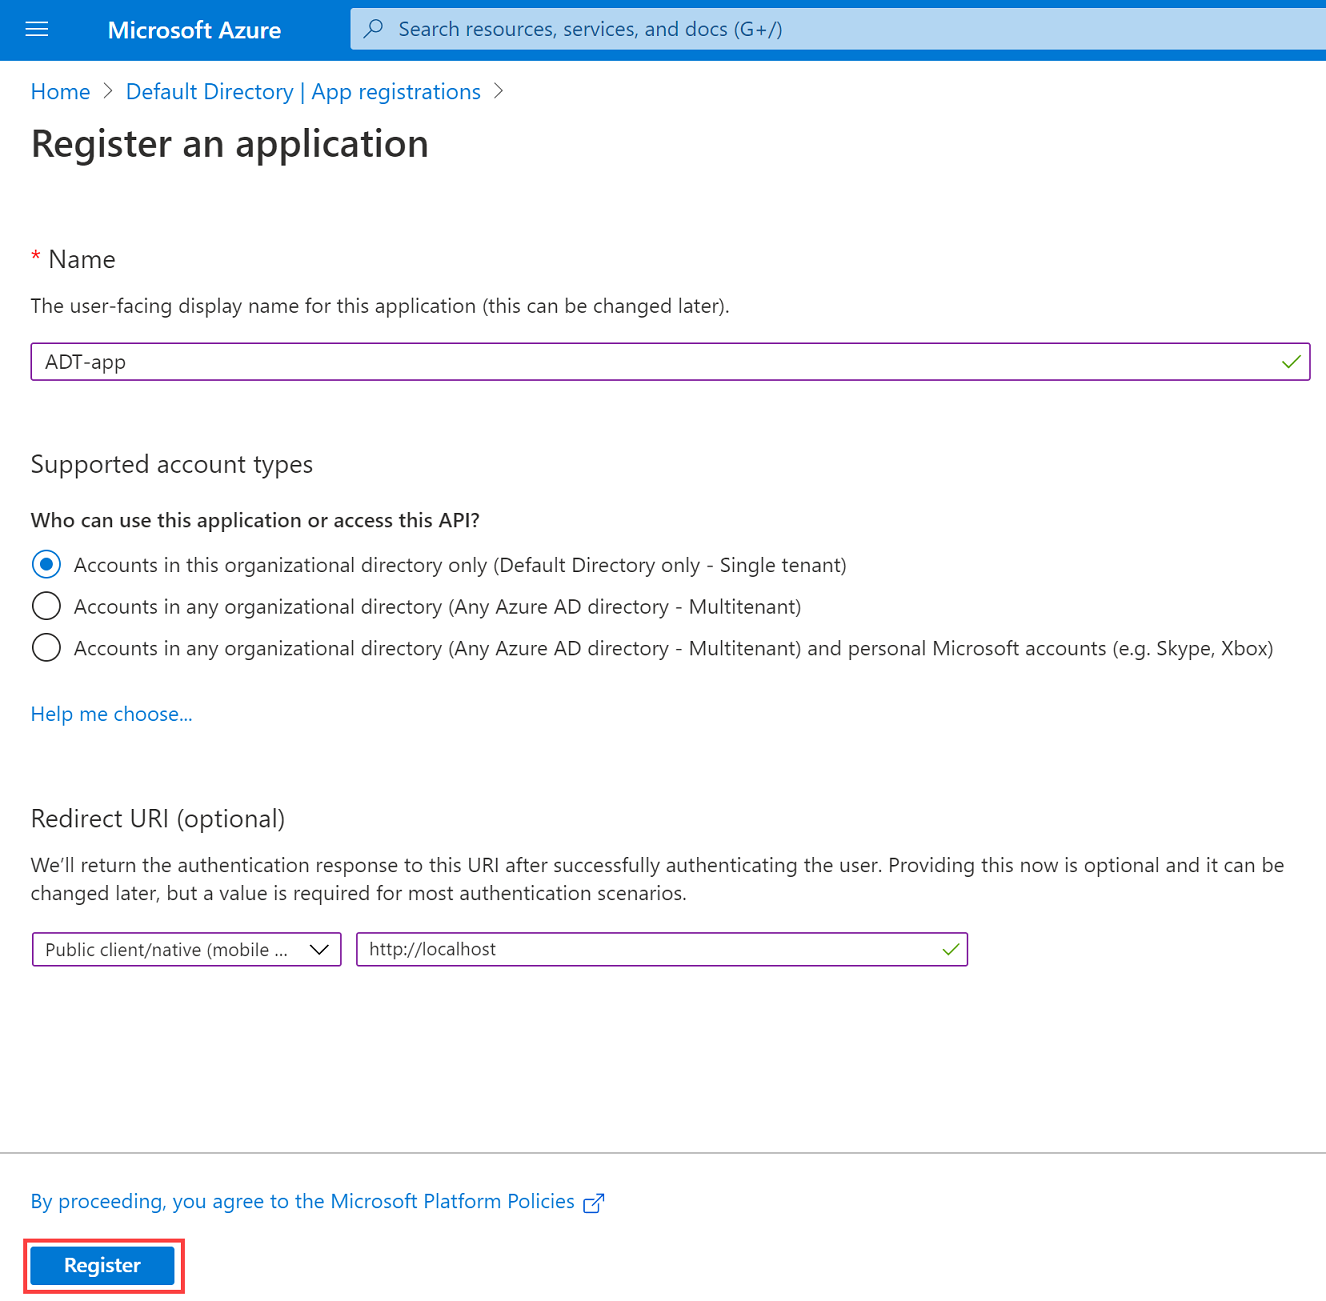 Screenshot of the 'Register an application' page in the Azure portal with the described values filled in.